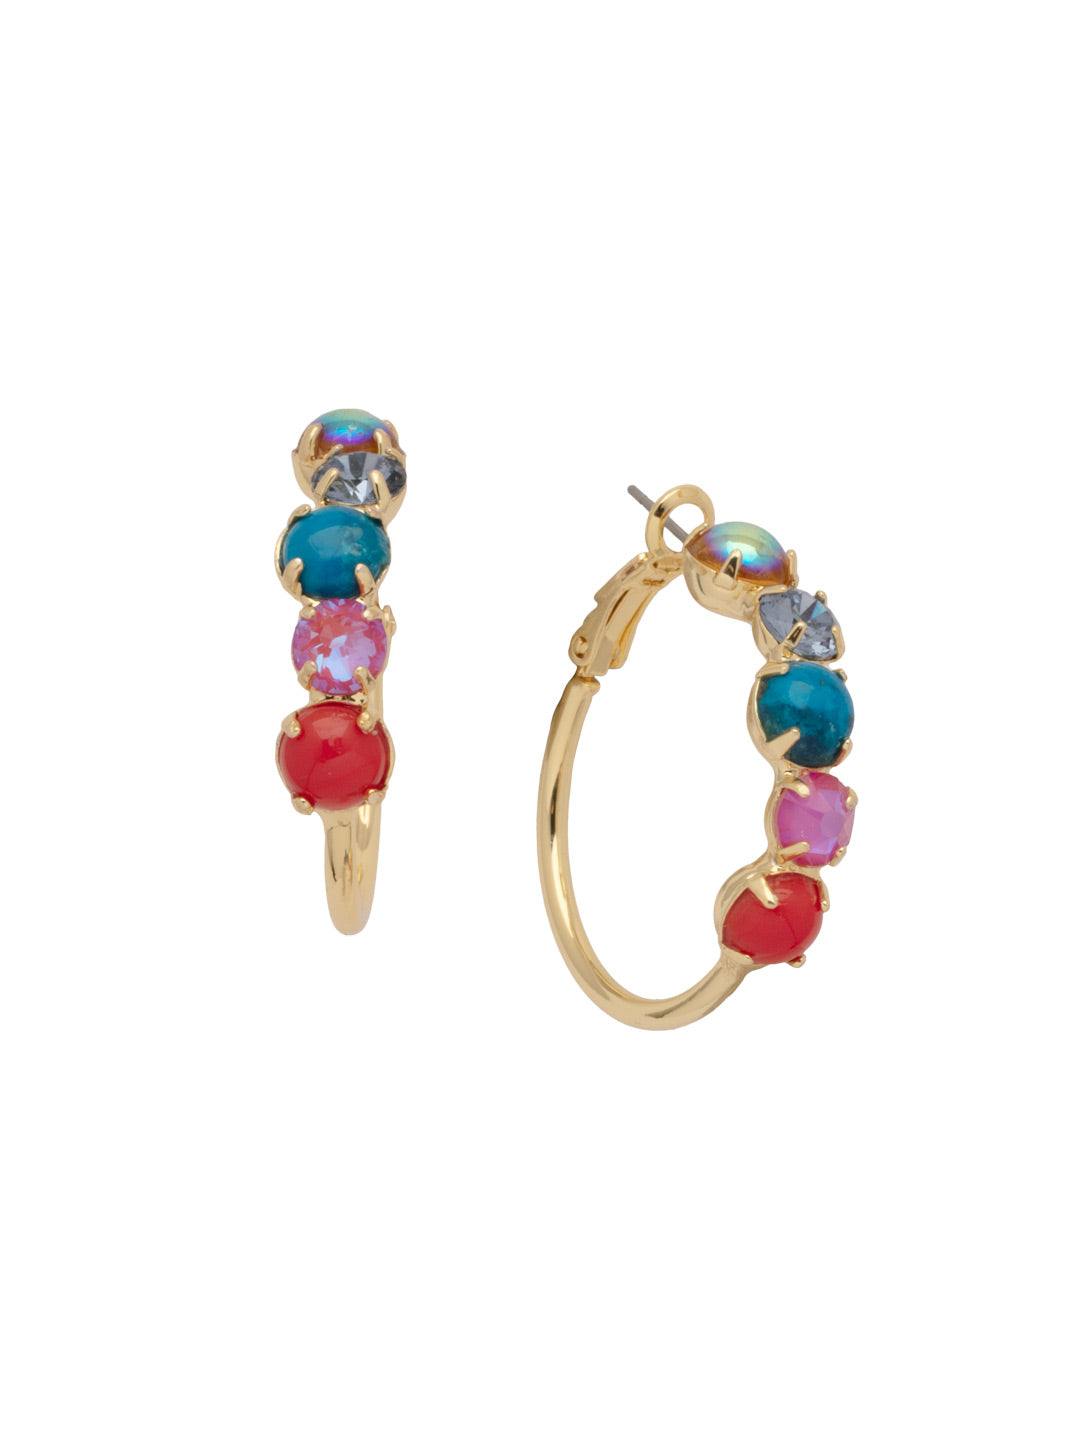 Xena Hoop Earrings - EFF112BGHBR - <p>The Xena Hoop Earrings feature small round cut crystals and semi-precious stones on a classic metal hoop. From Sorrelli's Happy Birthday Redux collection in our Bright Gold-tone finish.</p>